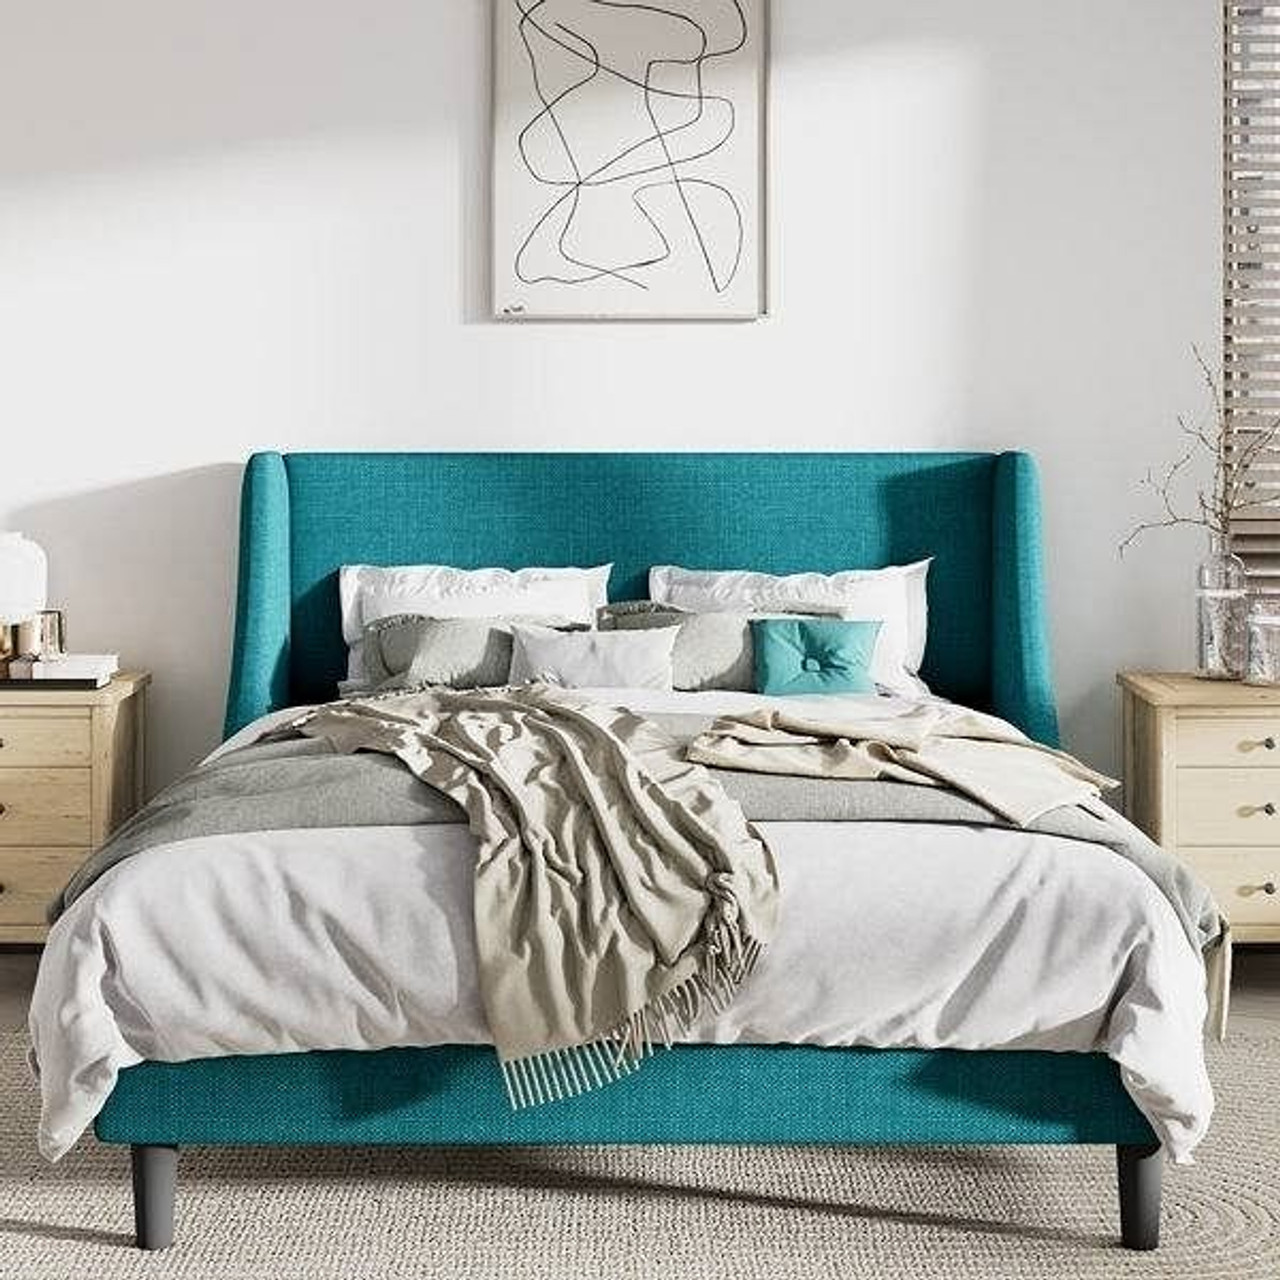 Queen Size Turquoise Linen Blend Upholstered Platform Bed with Wingback Headboard